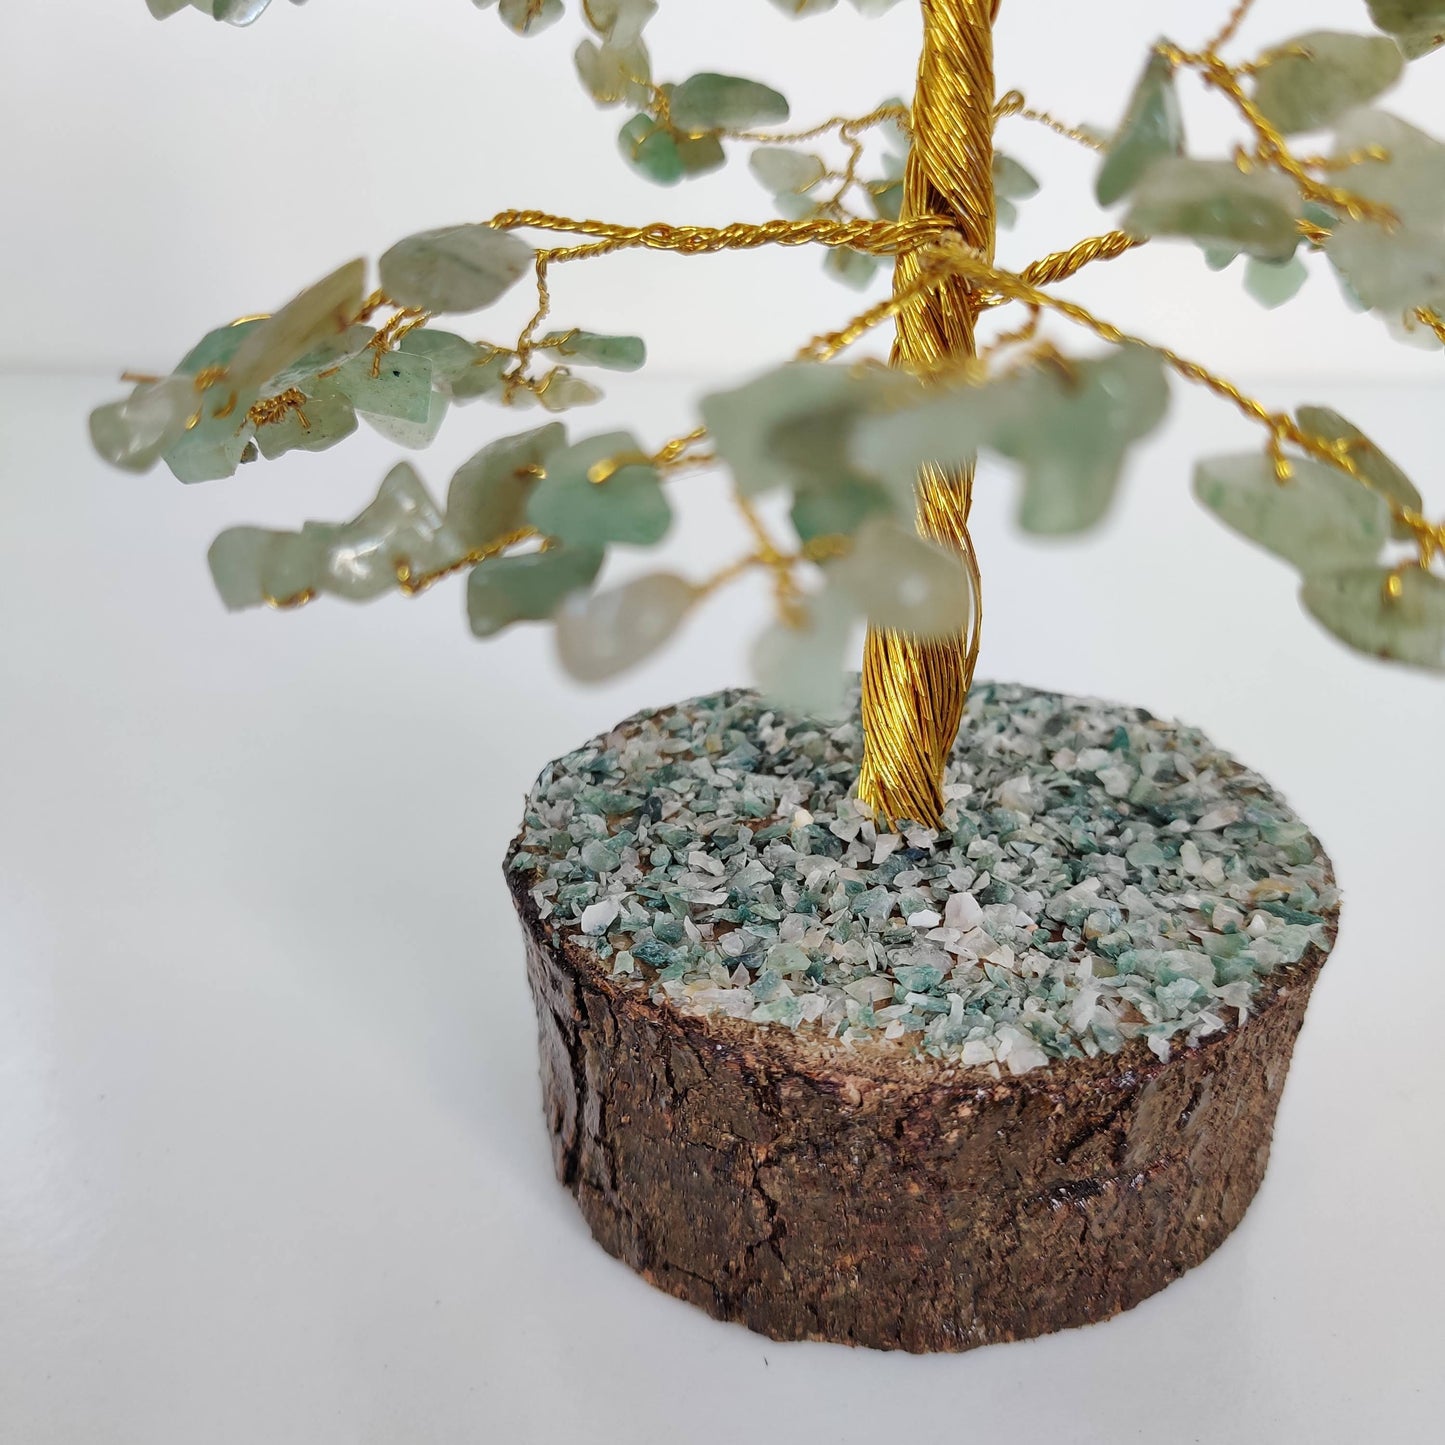 Green Aventurine Crystal Tree on Wooden Base with Golden Wire Stem - Rivendell Shop